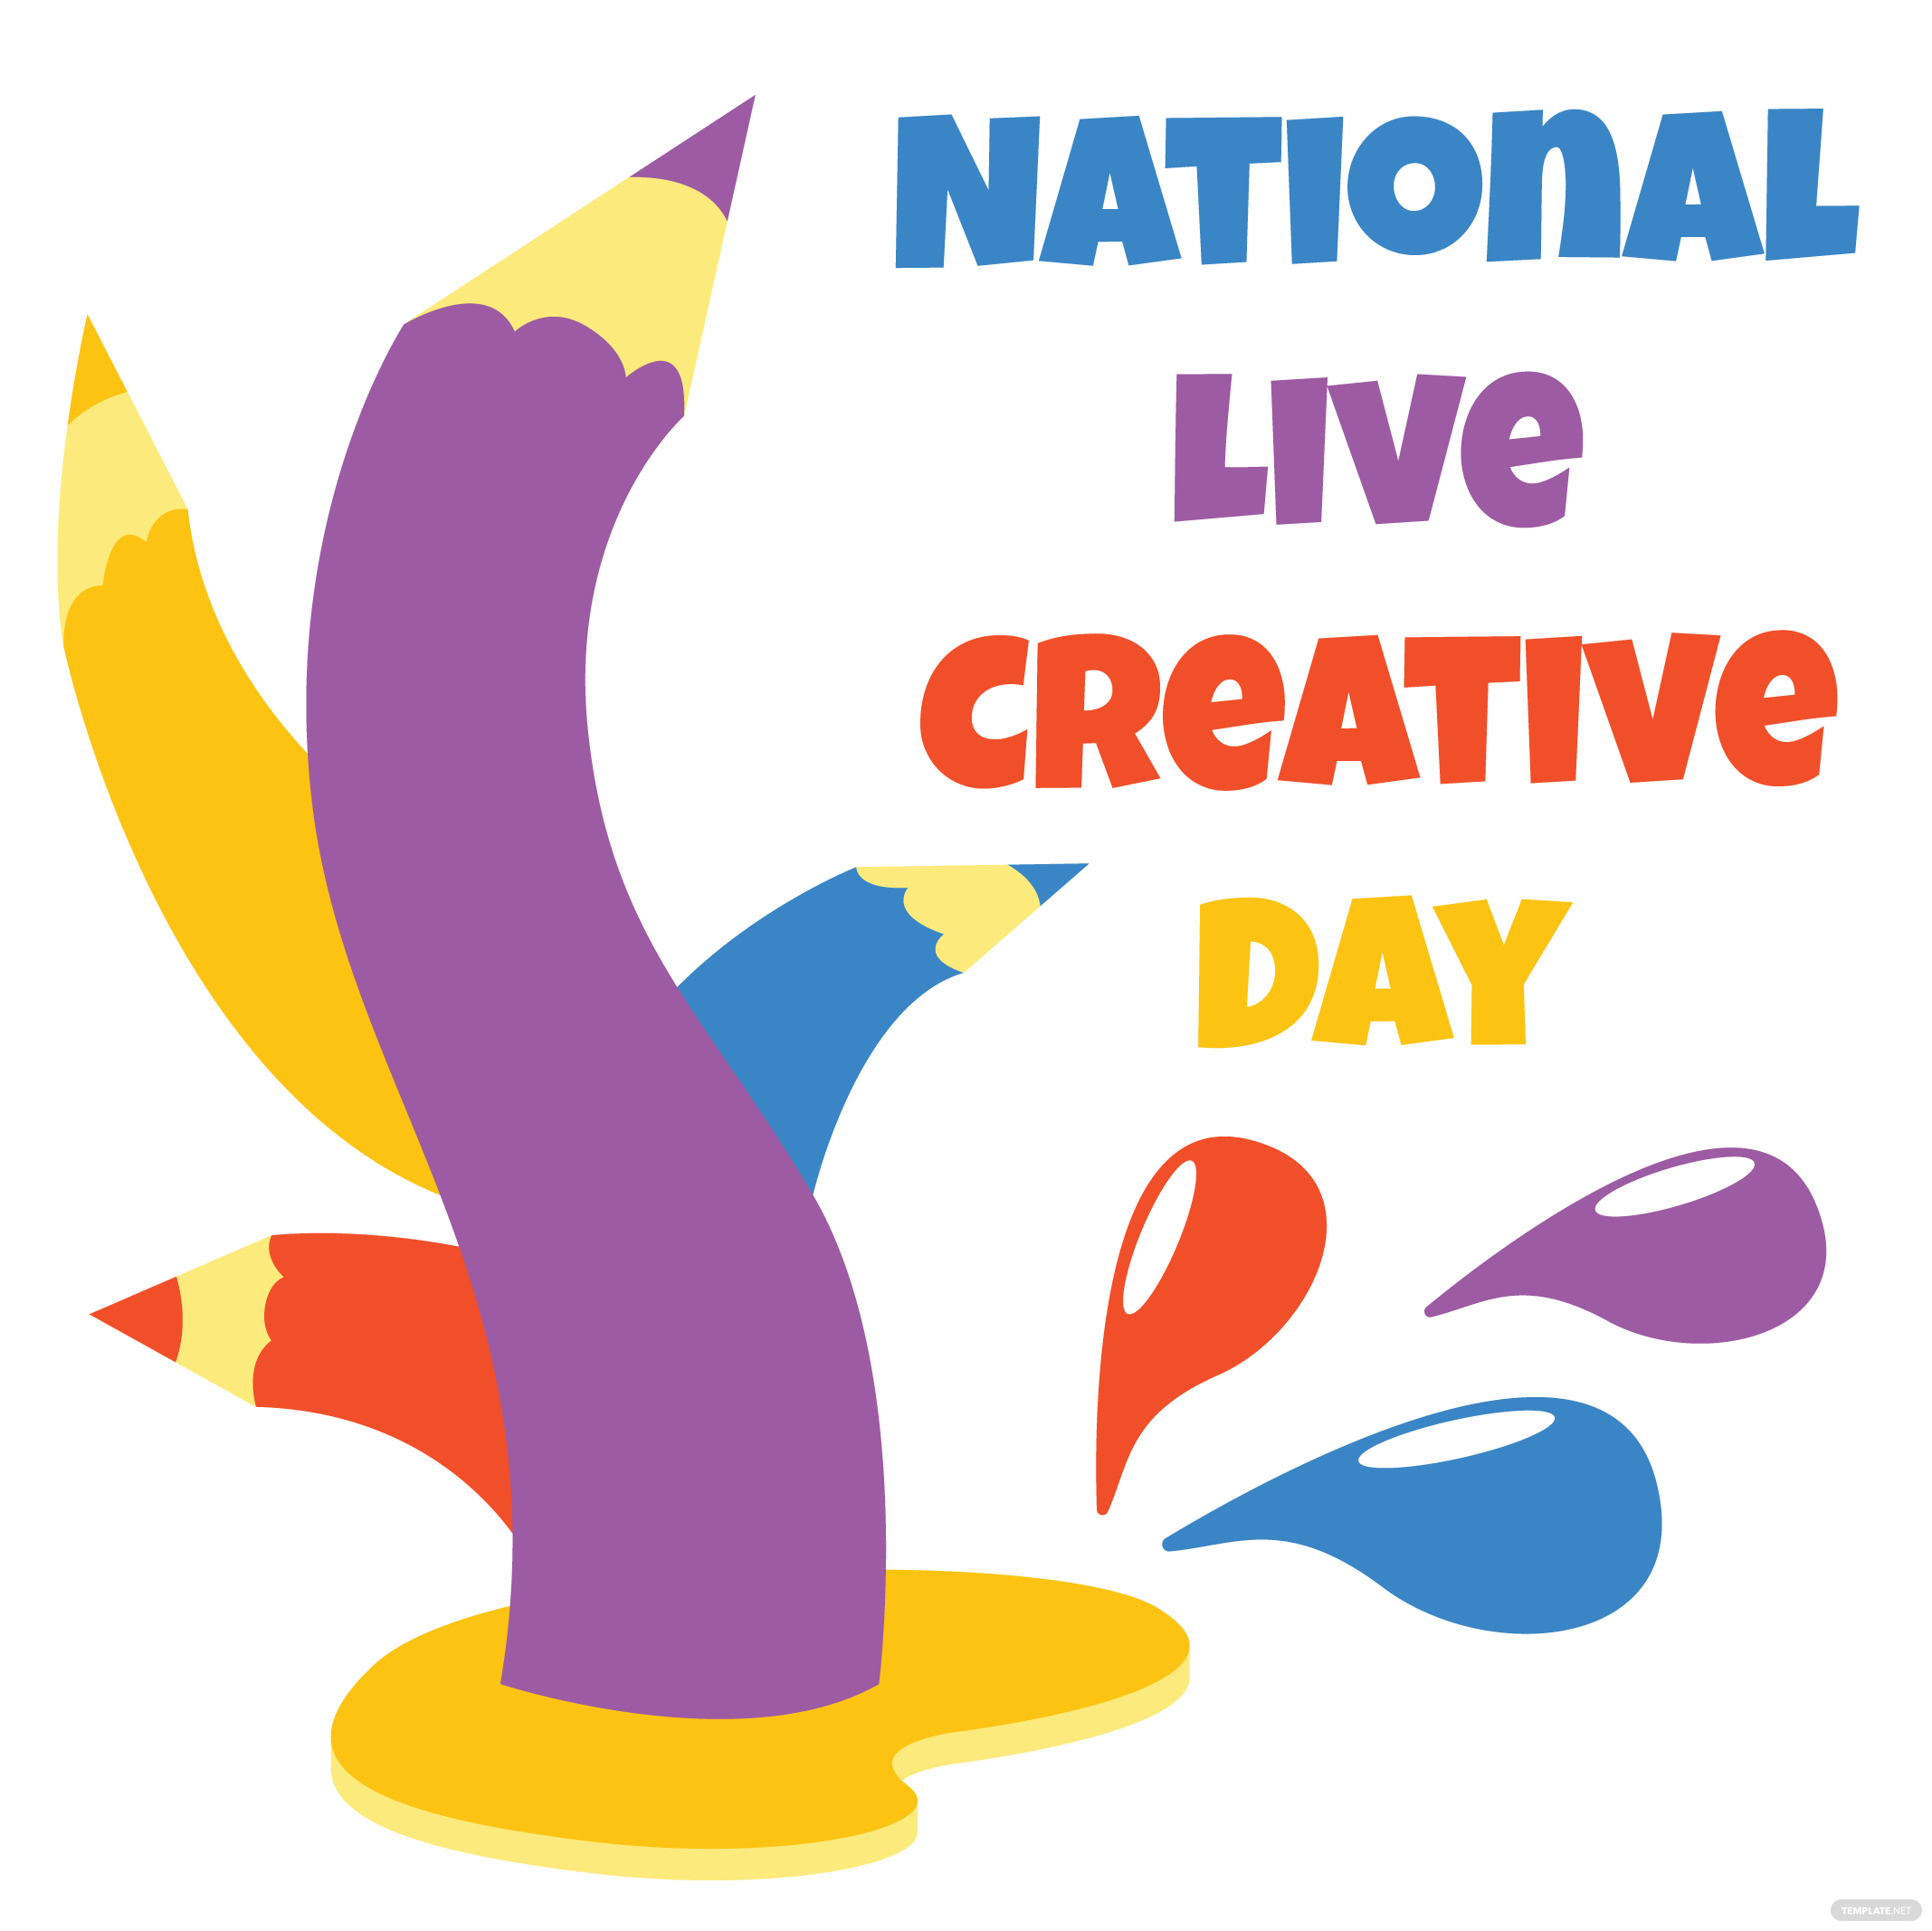 national live creative day clipart vector